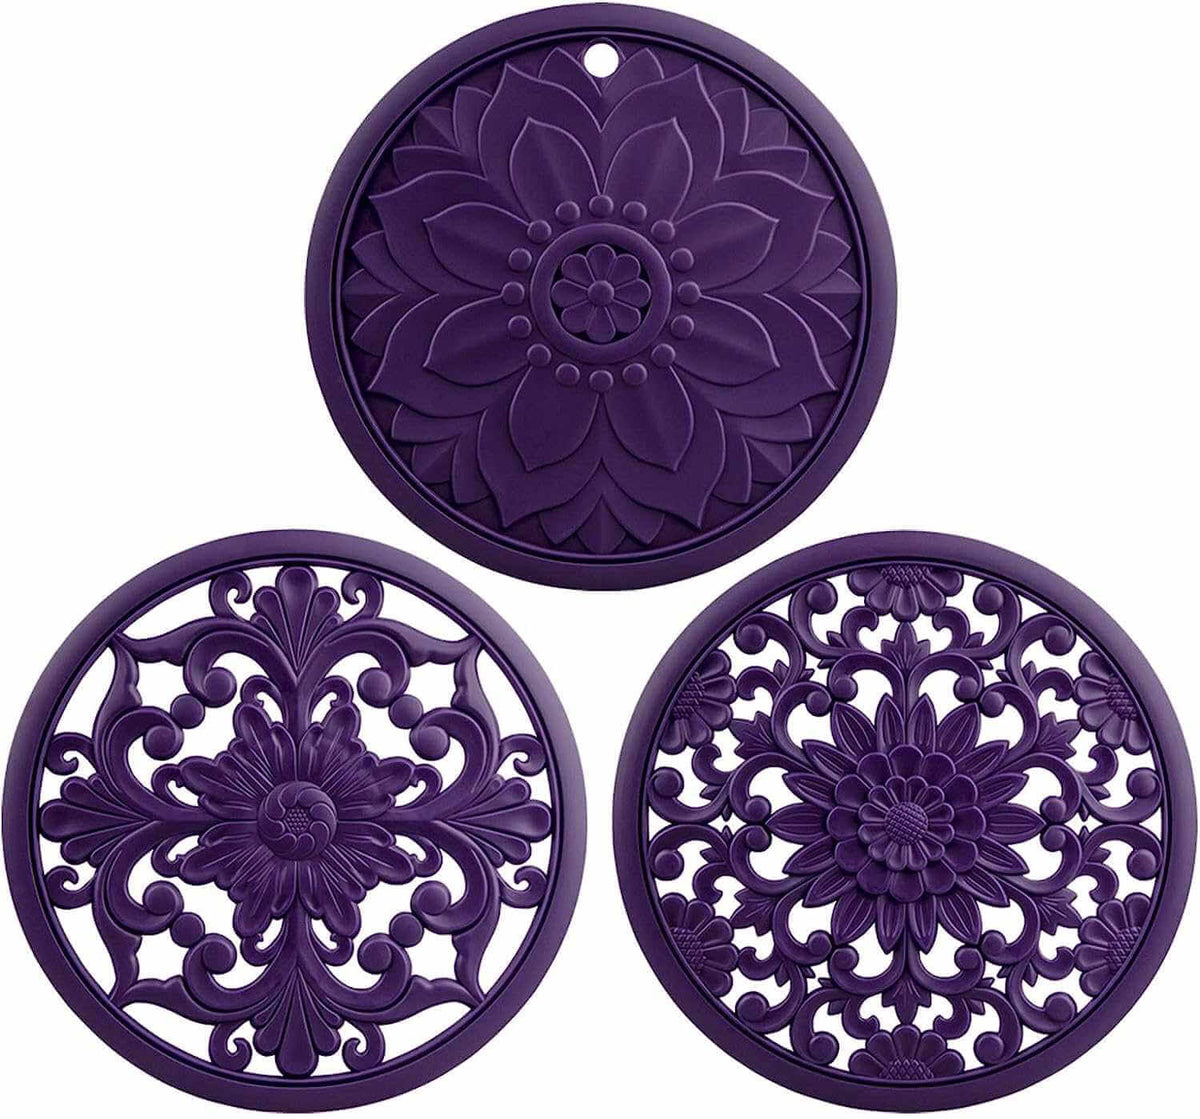 EZYHOME Set of 3 Silicone Trivet Mats,Multi-Use Intricately Carved Hot Pot Trivets for Hot Dishes,Kitchen Mats,Table Mats,Flexible Durable Non Slip & Heat Resistant Kitchen Hot Pads Coasters 